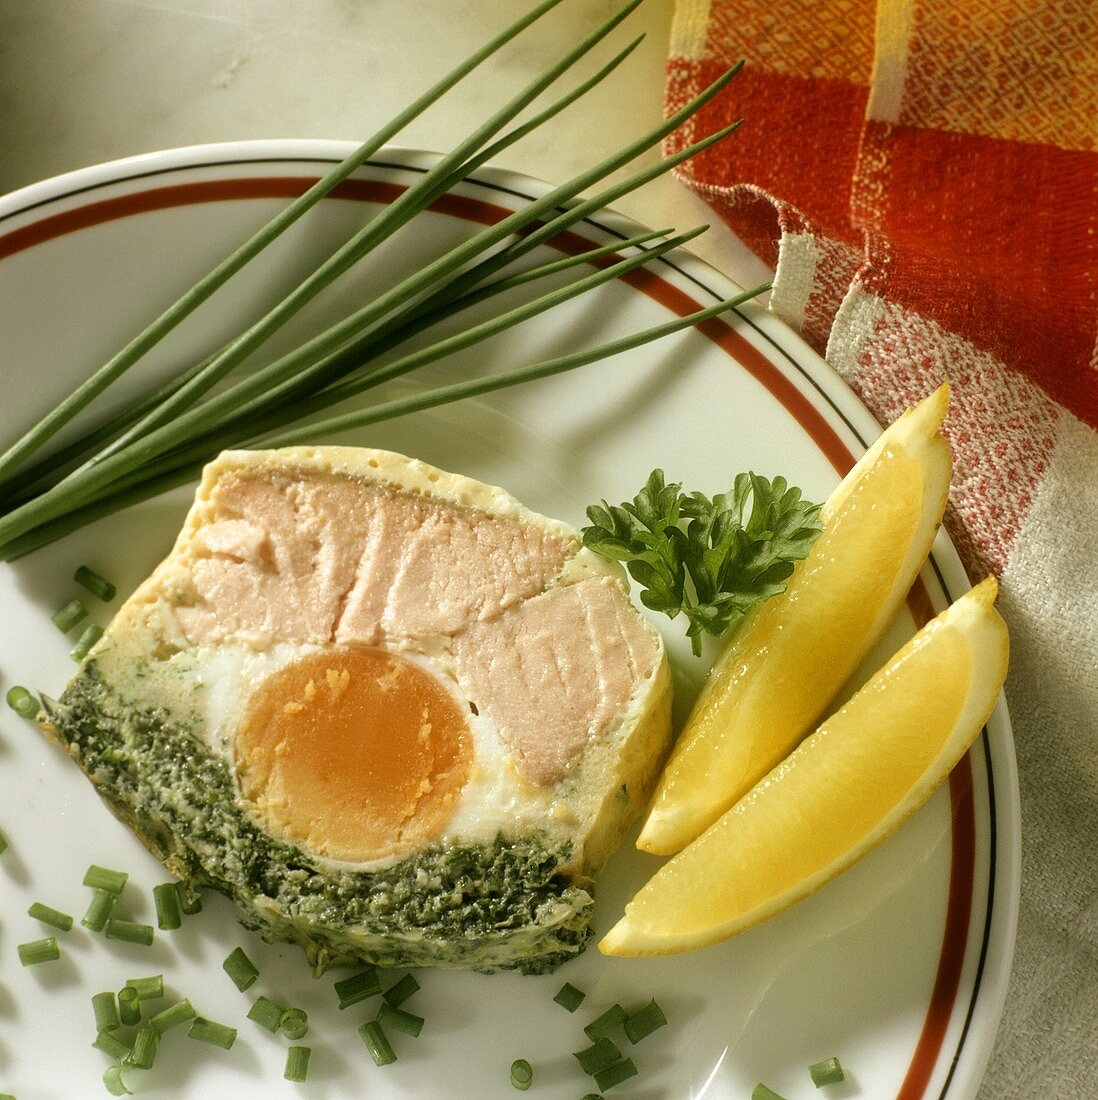 Fish and herb terrine with hard-boiled egg & chives